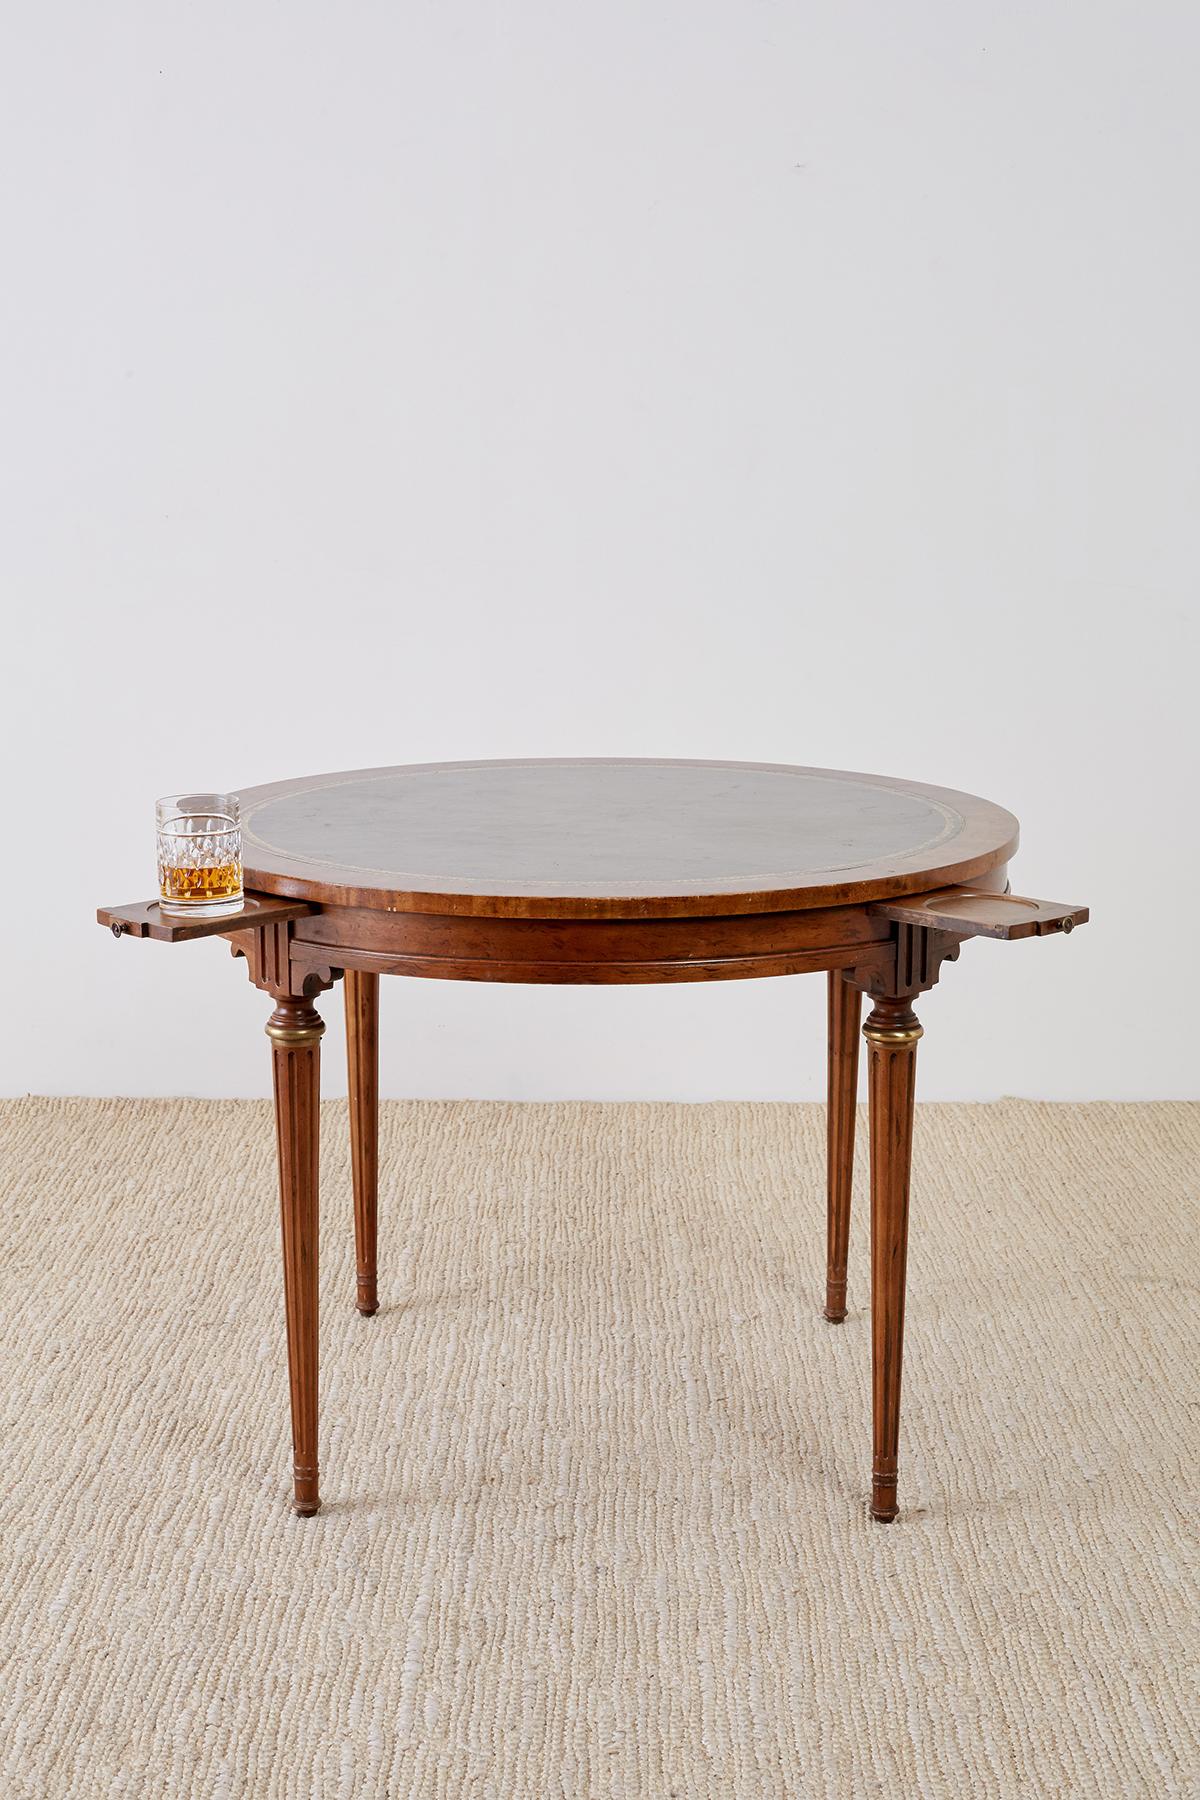 20th Century French Louis XVI Style Round Leather Top Game Table